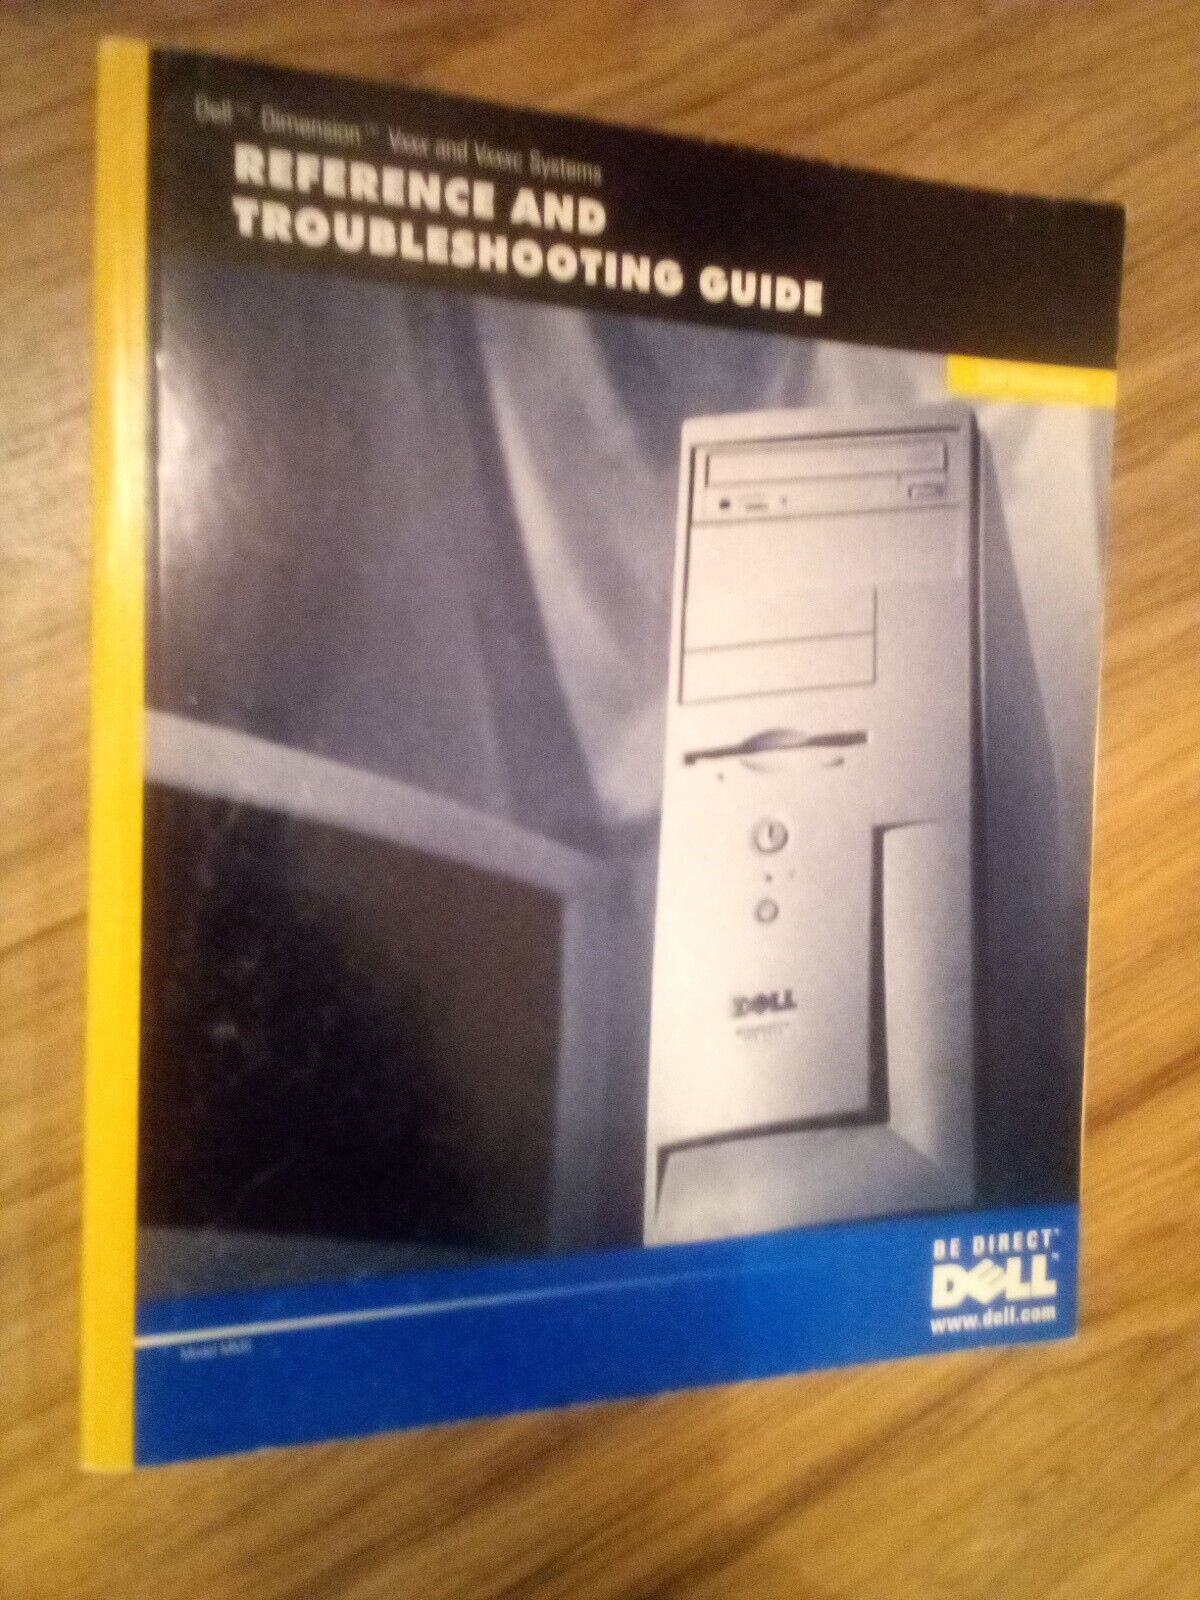 Dell Dimension Vxxx & Vxxxc System Reference & Troubleshooting Guide 1999 Manual